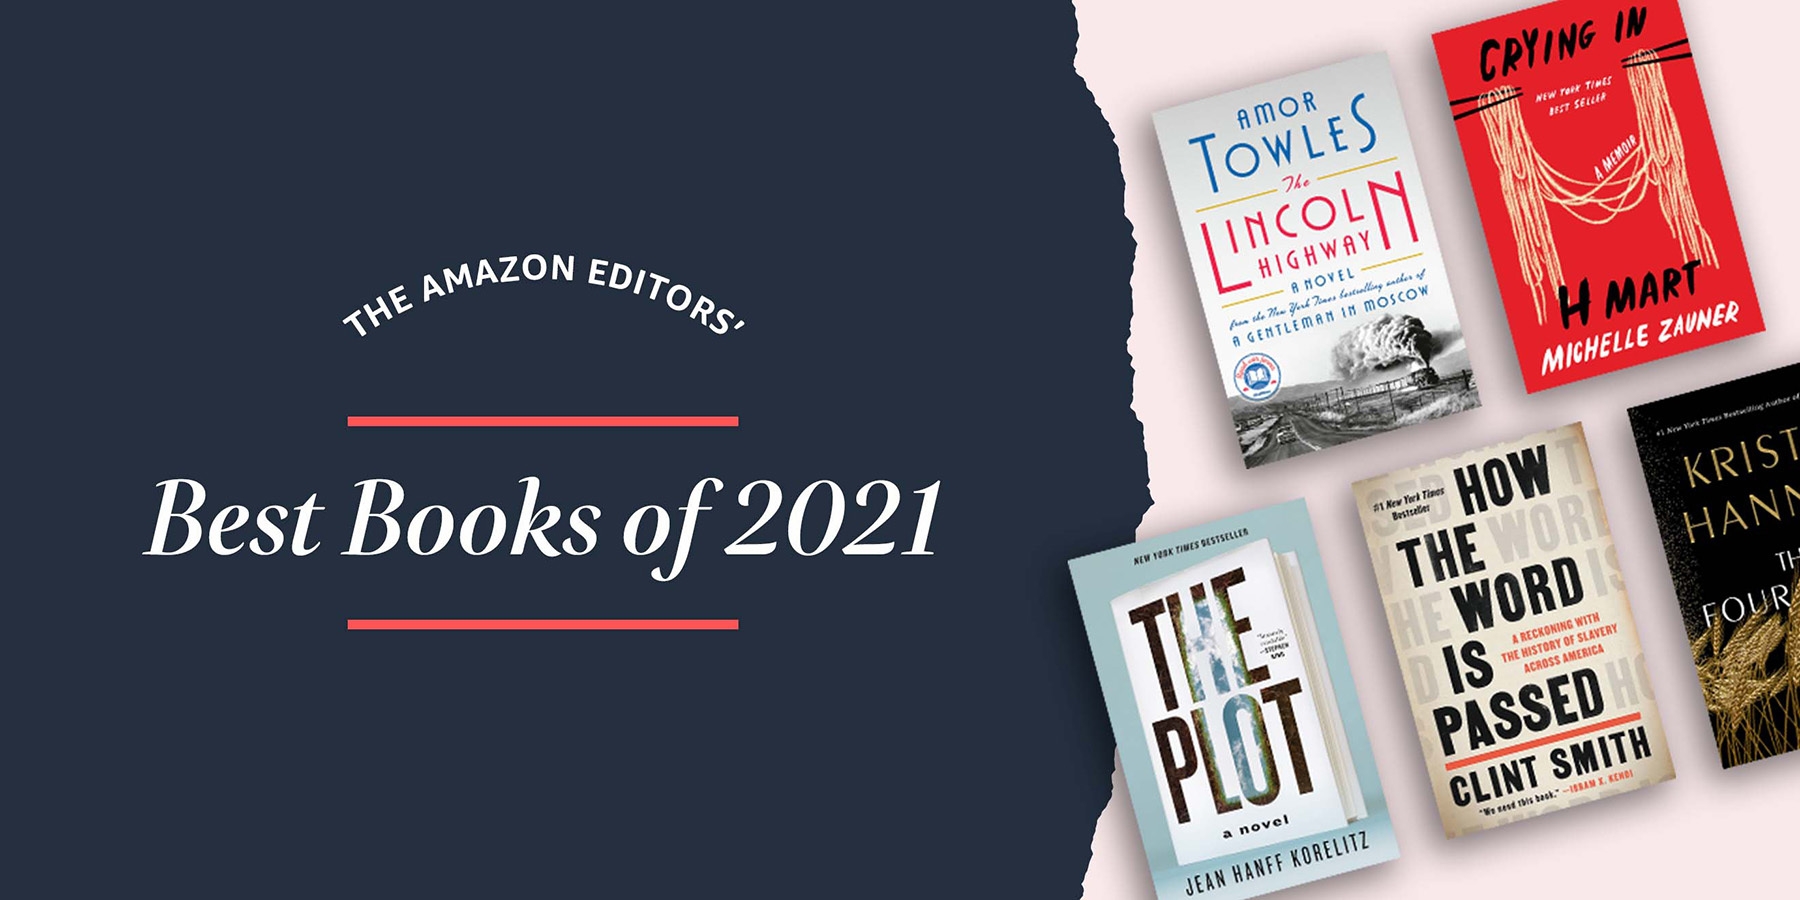 An illustration. One half of it is dark blue and the other light pink. On the dark blue section to the left, there is text overlaid that reads "THE AMAZON EDITORS' Best Books of 2021." On the light pink section to the right, there are book covers for The Lincoln Highway, Crying in H Mart, The Plot, How The Word is Passed, and The Four Winds.  